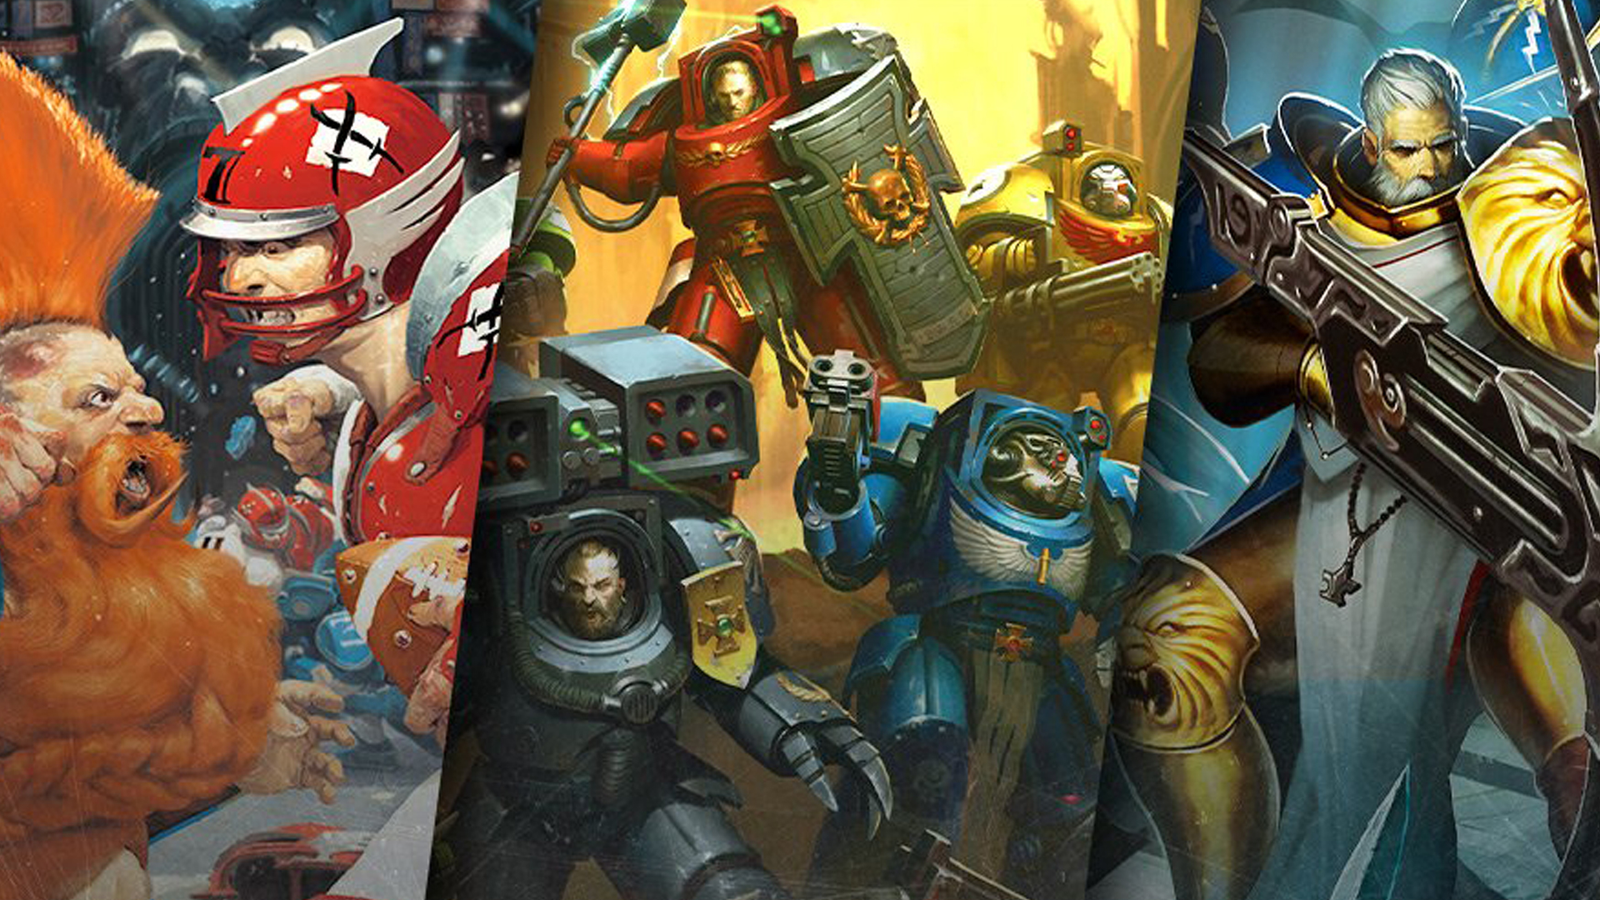 Warhammer 40,000, Age of Sigmar and Blood Bowl are all getting new